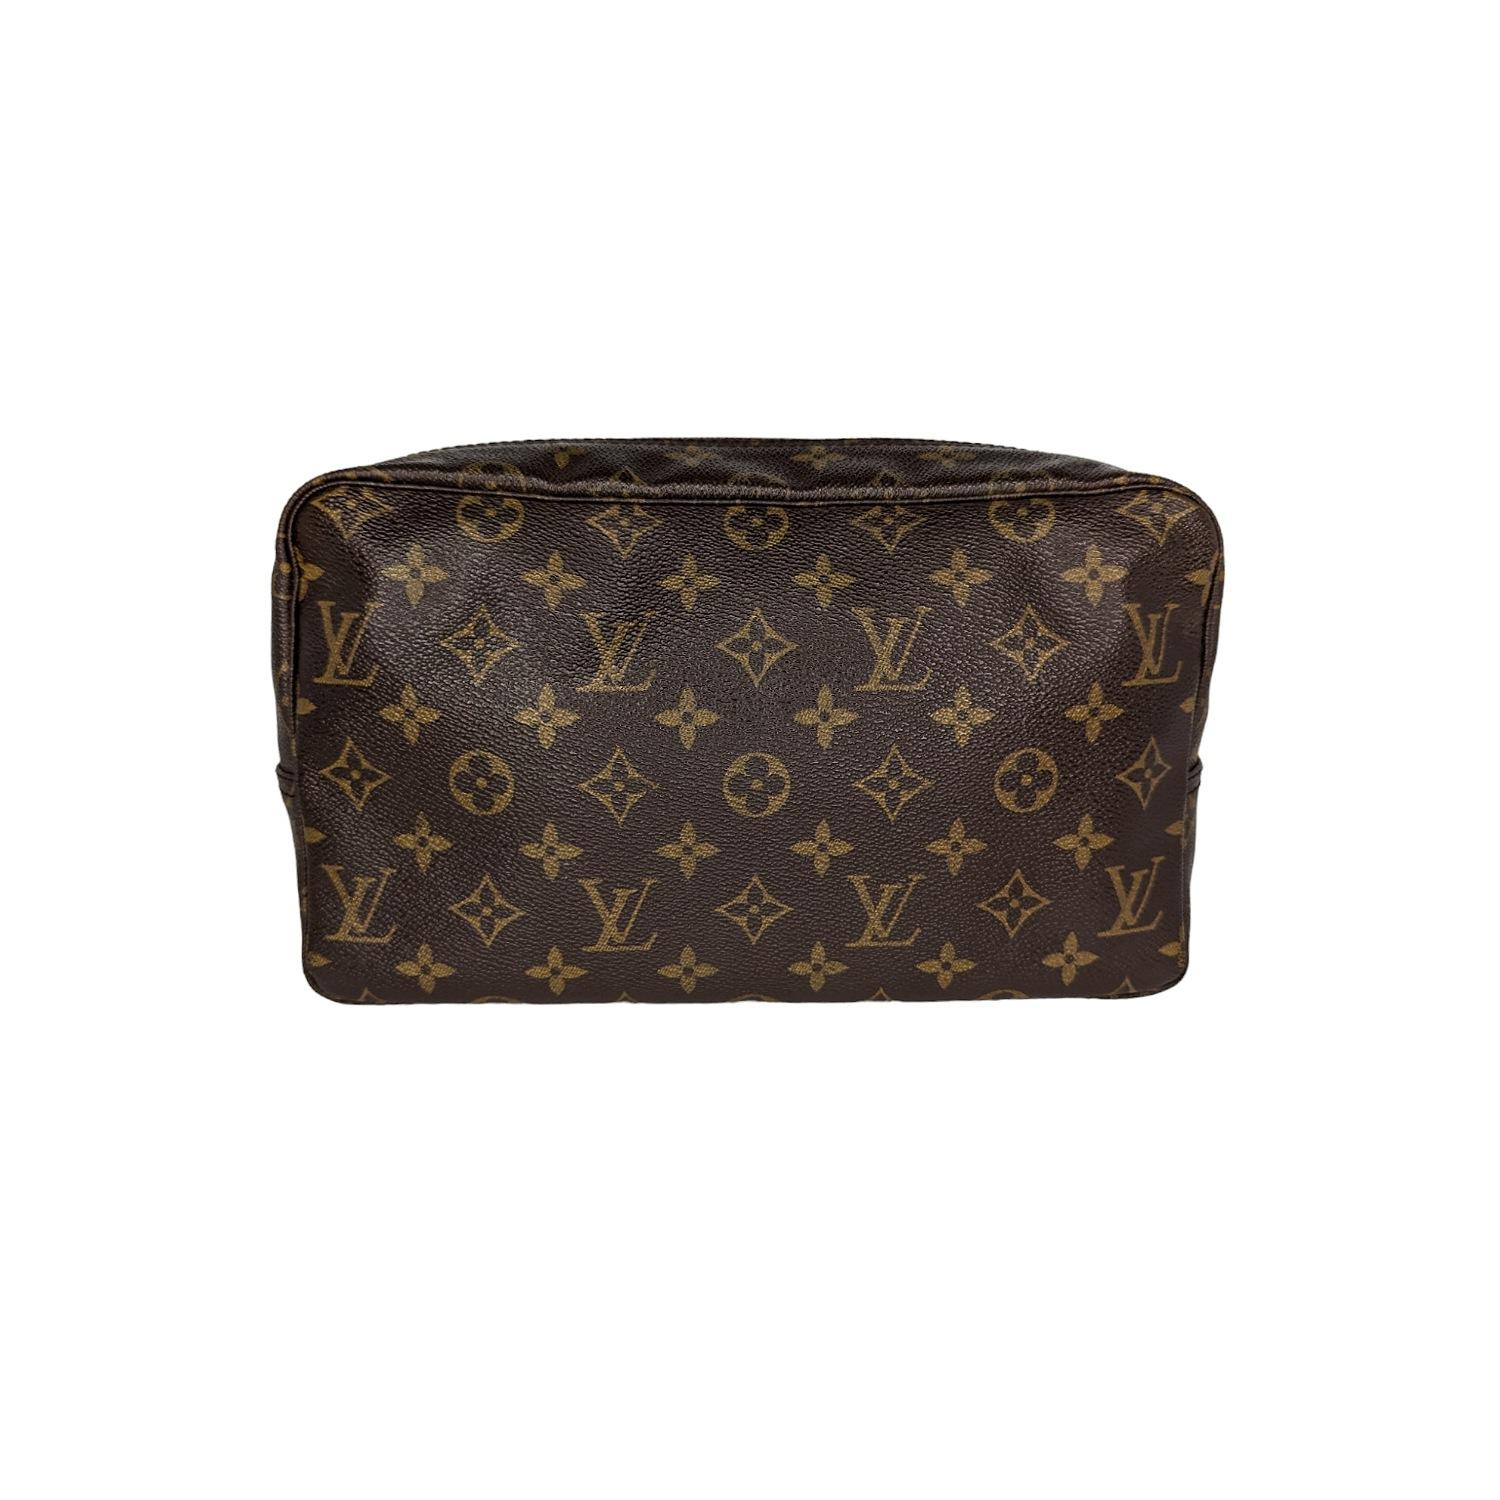 This Louis Vuitton Vintage Monogram Canvas Trousse Toiletry Cosmetic Bag is the perfect solution for organizing your toiletries or make up in style. It features a washable textile lining with three elastic holders for bottles or brushes and a small